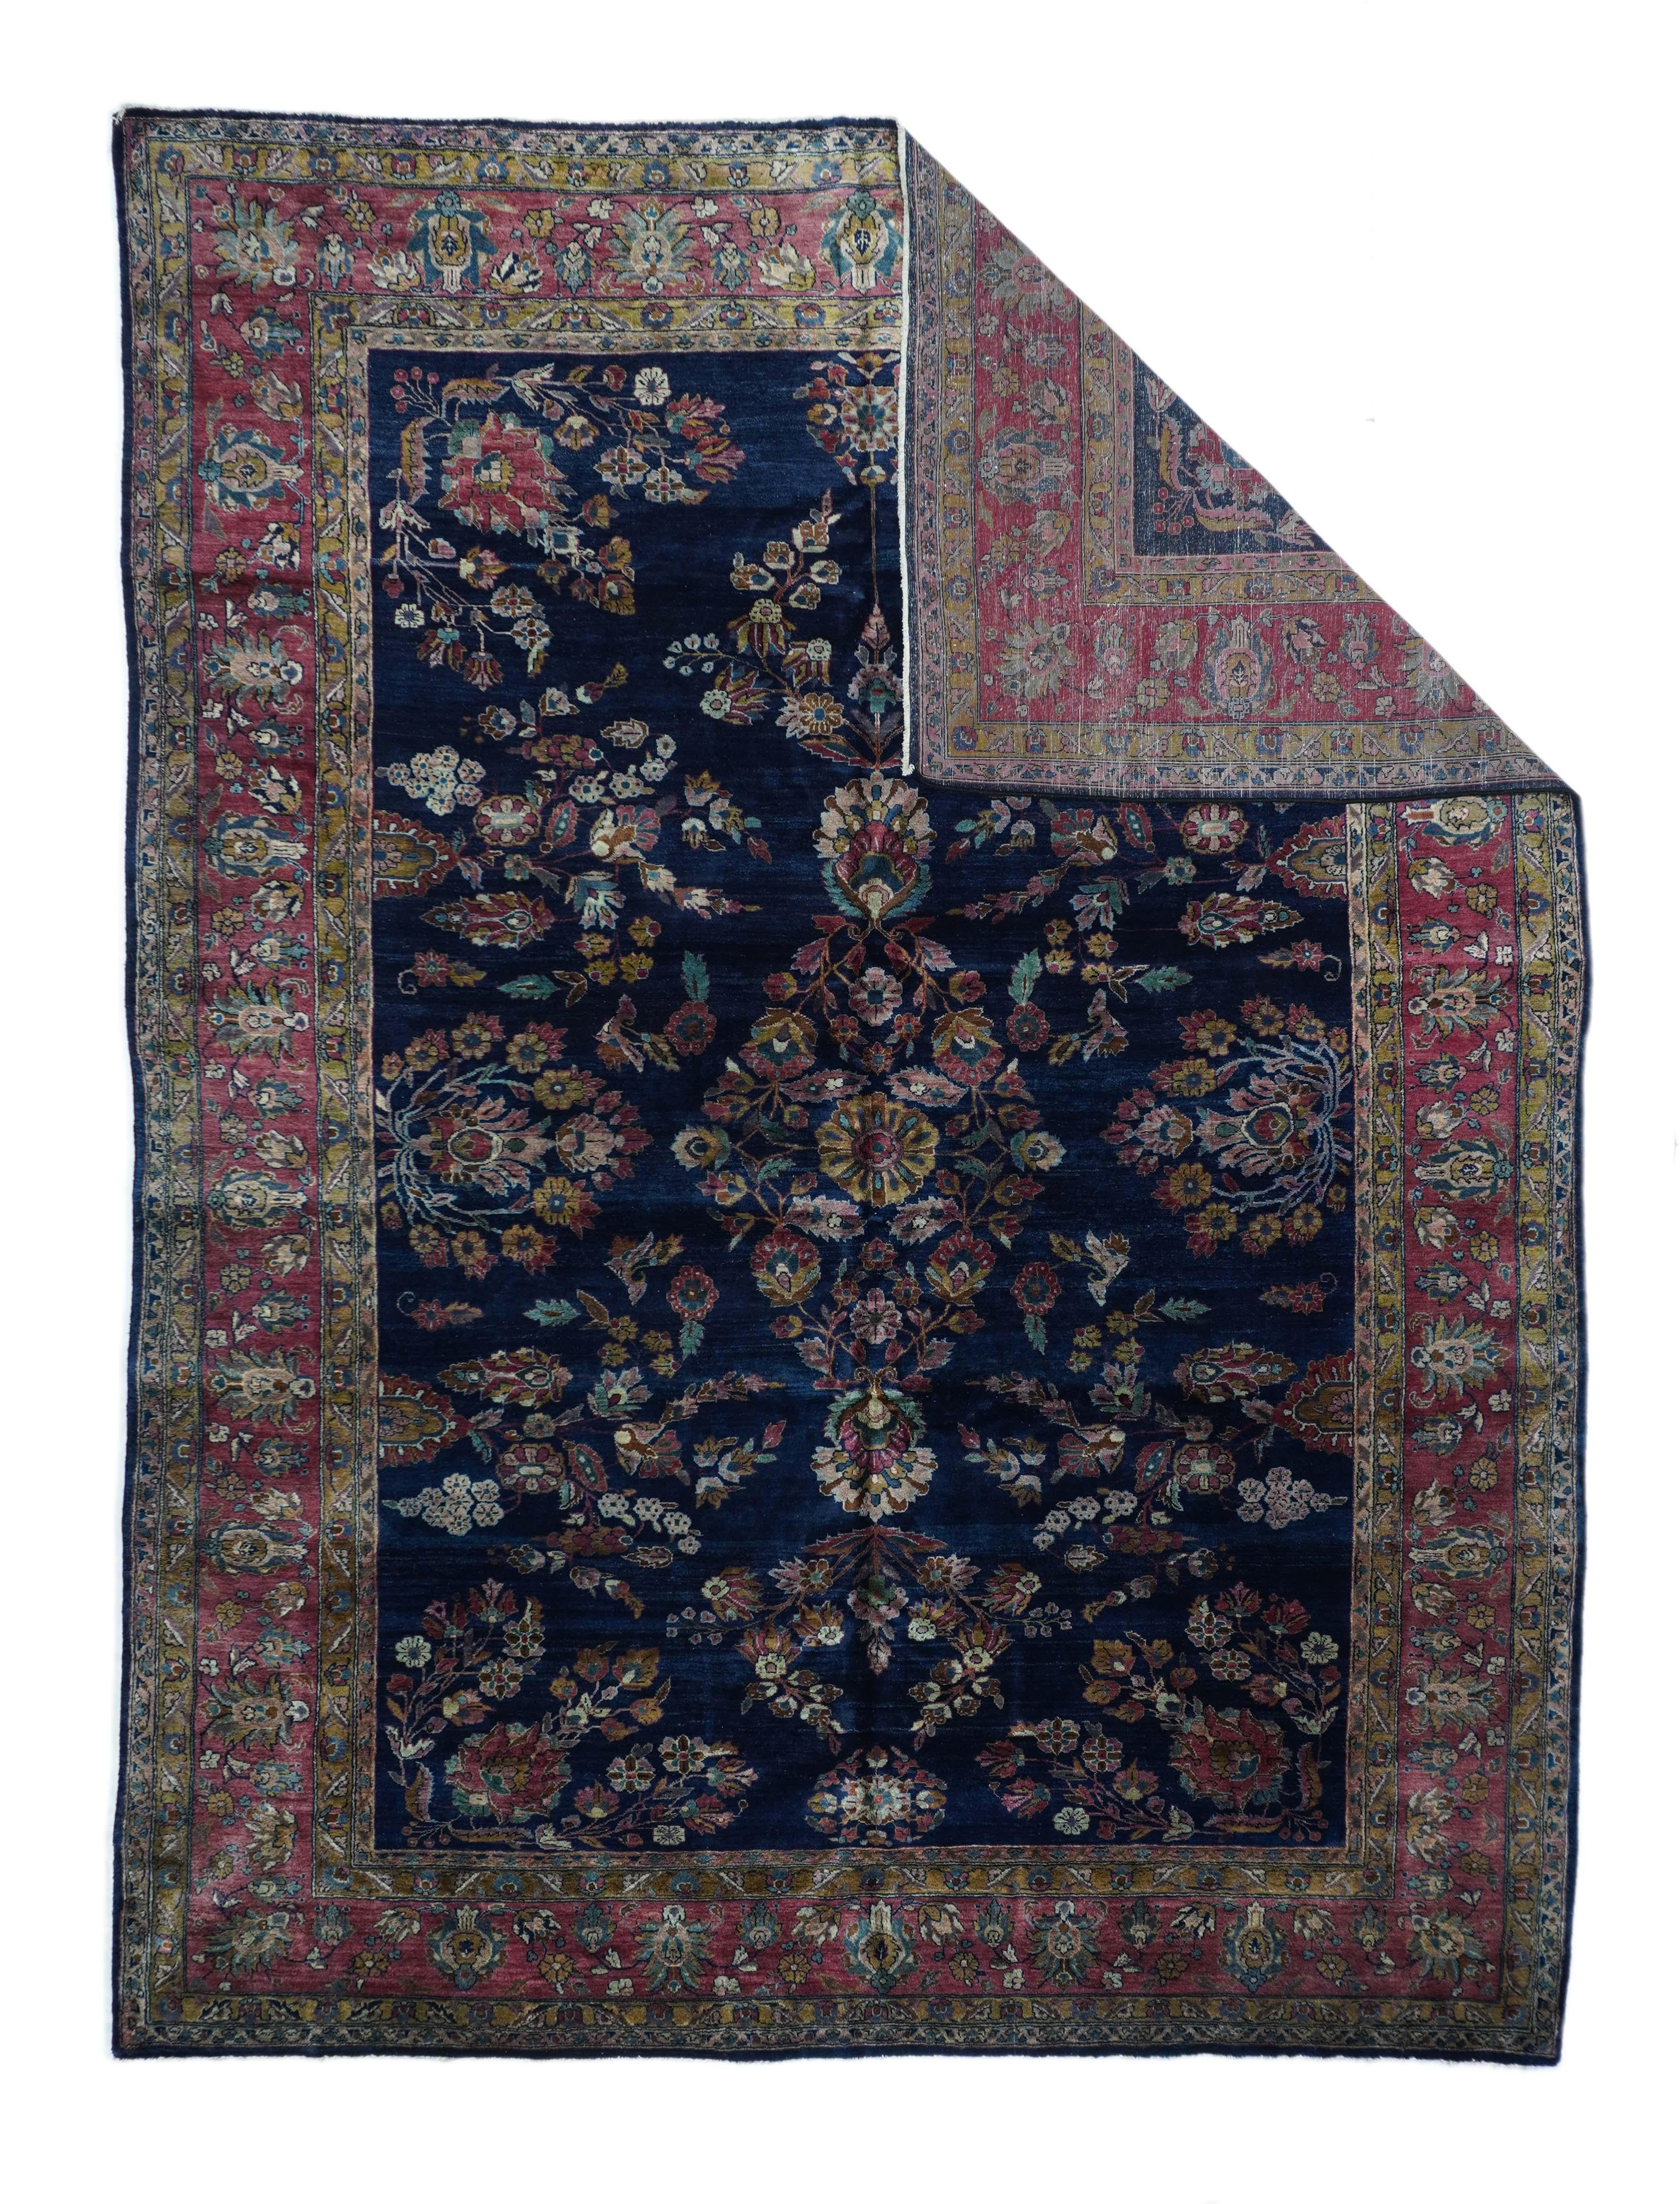 This C. 1920 carpet attributed to Mohajeran village in the Sarouk/Sultanabad/Arak area, shows a deep indigo field with various flower sprays and side palmettes, in shades of teal, straw cream and red. Mulberry red border with two palmette types in